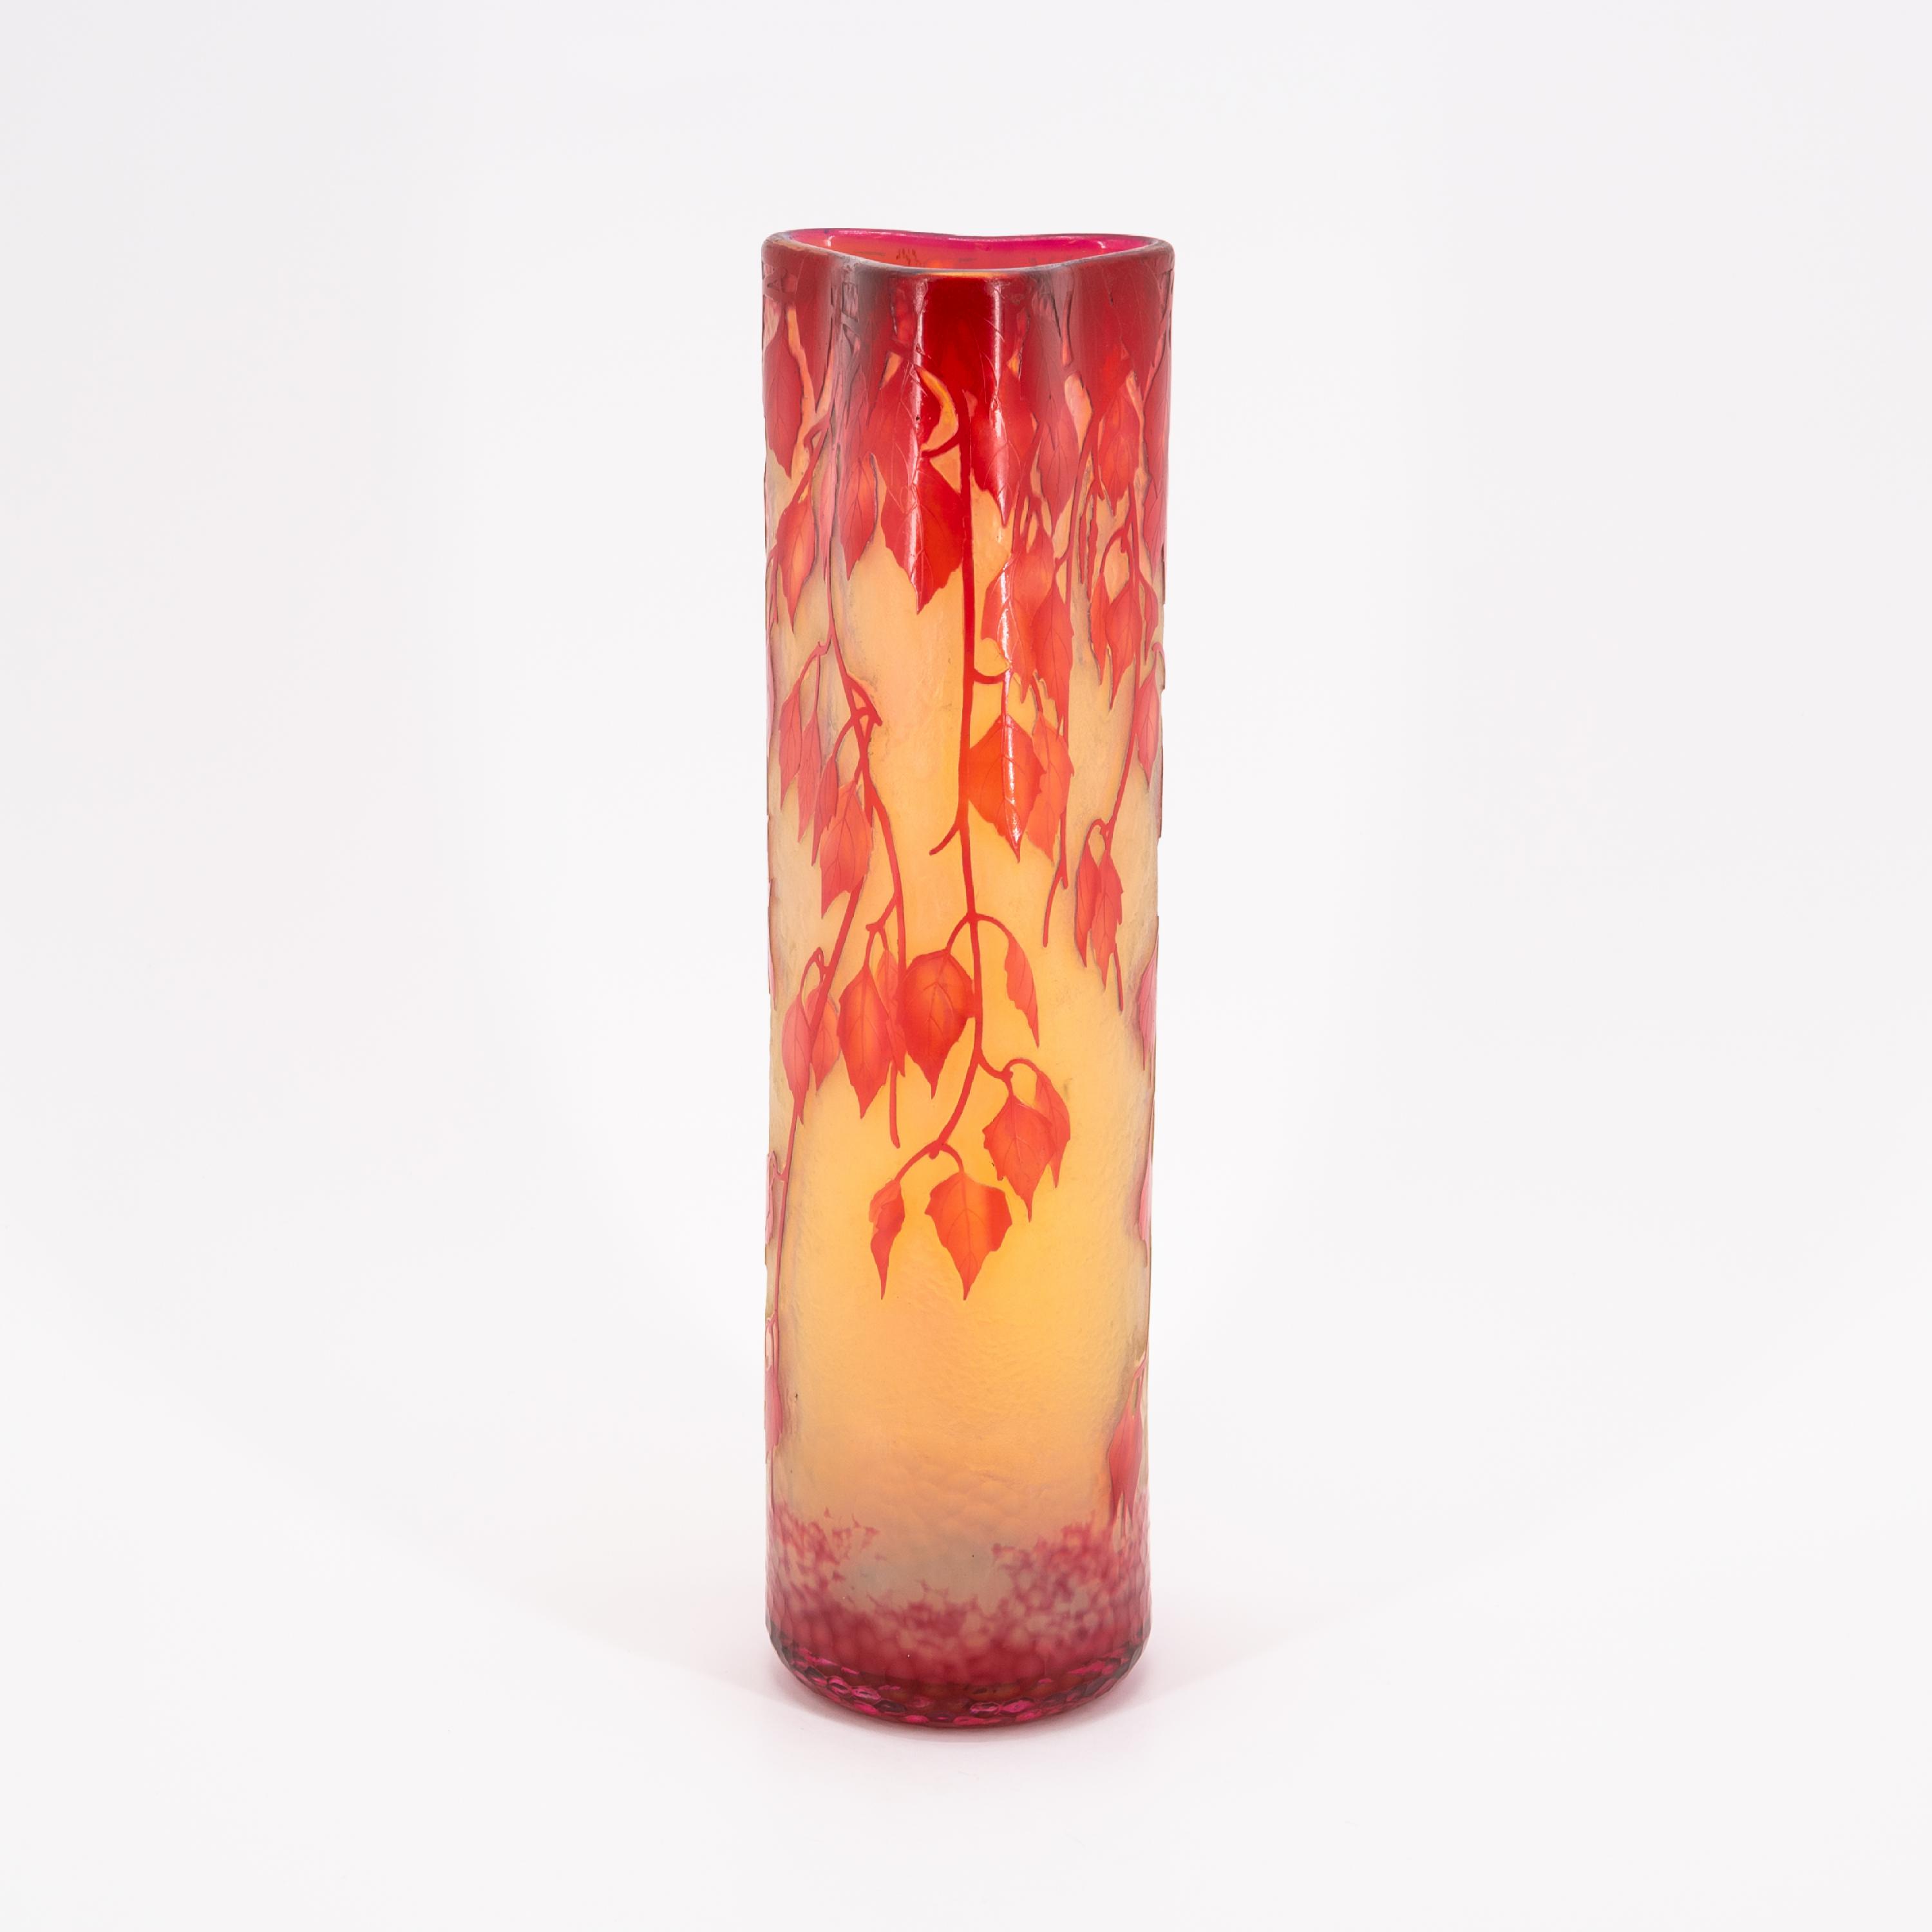 CYLINDER-SHAPED GLASS VASE WITH BIRCH LEAVES - Image 2 of 6